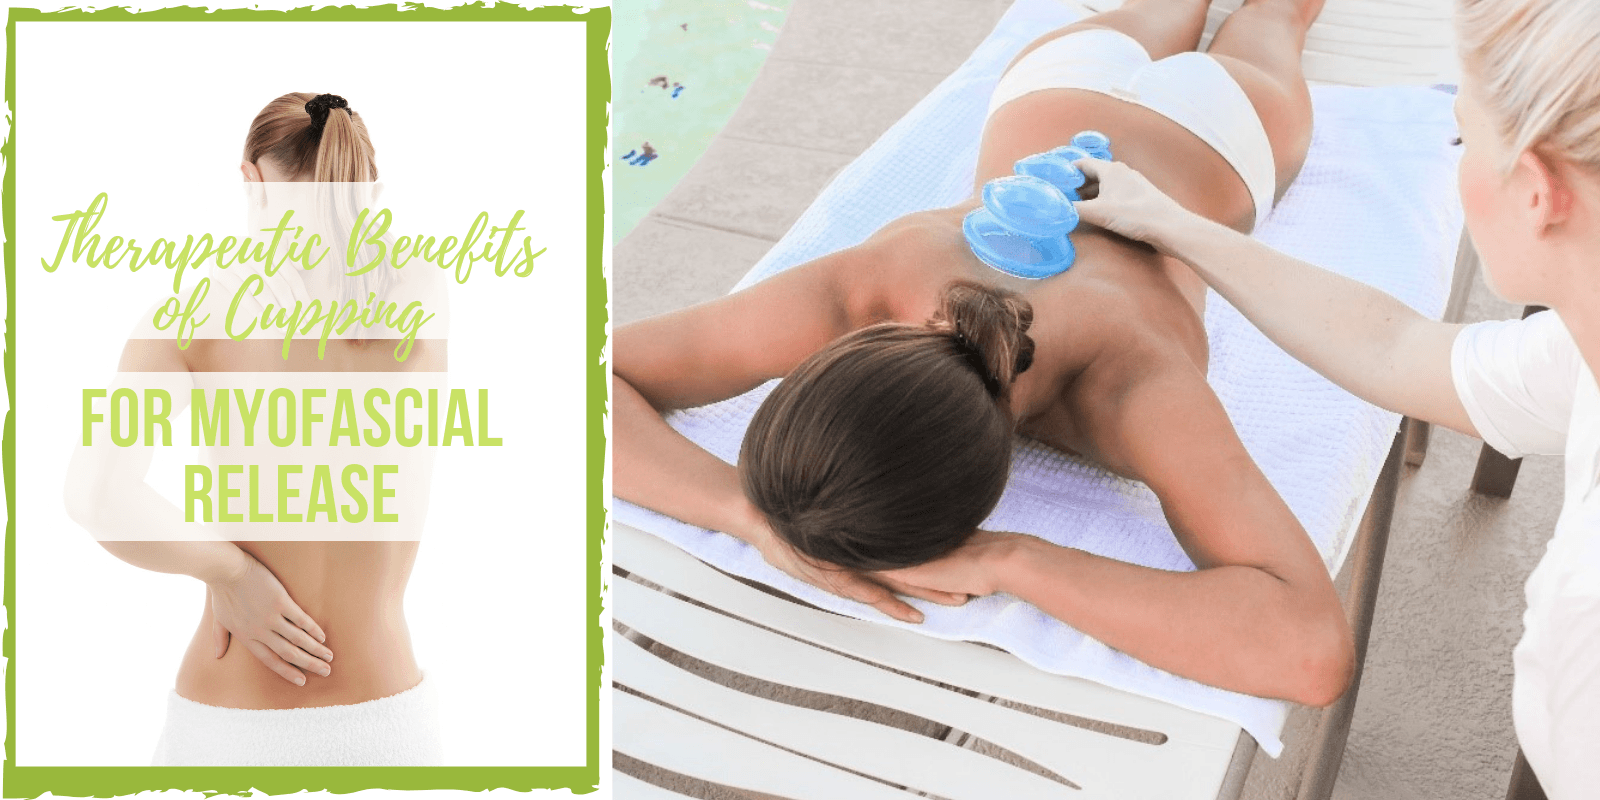 Therapeutic Benefits of Cupping for Myofascial Release - Lure Essentials